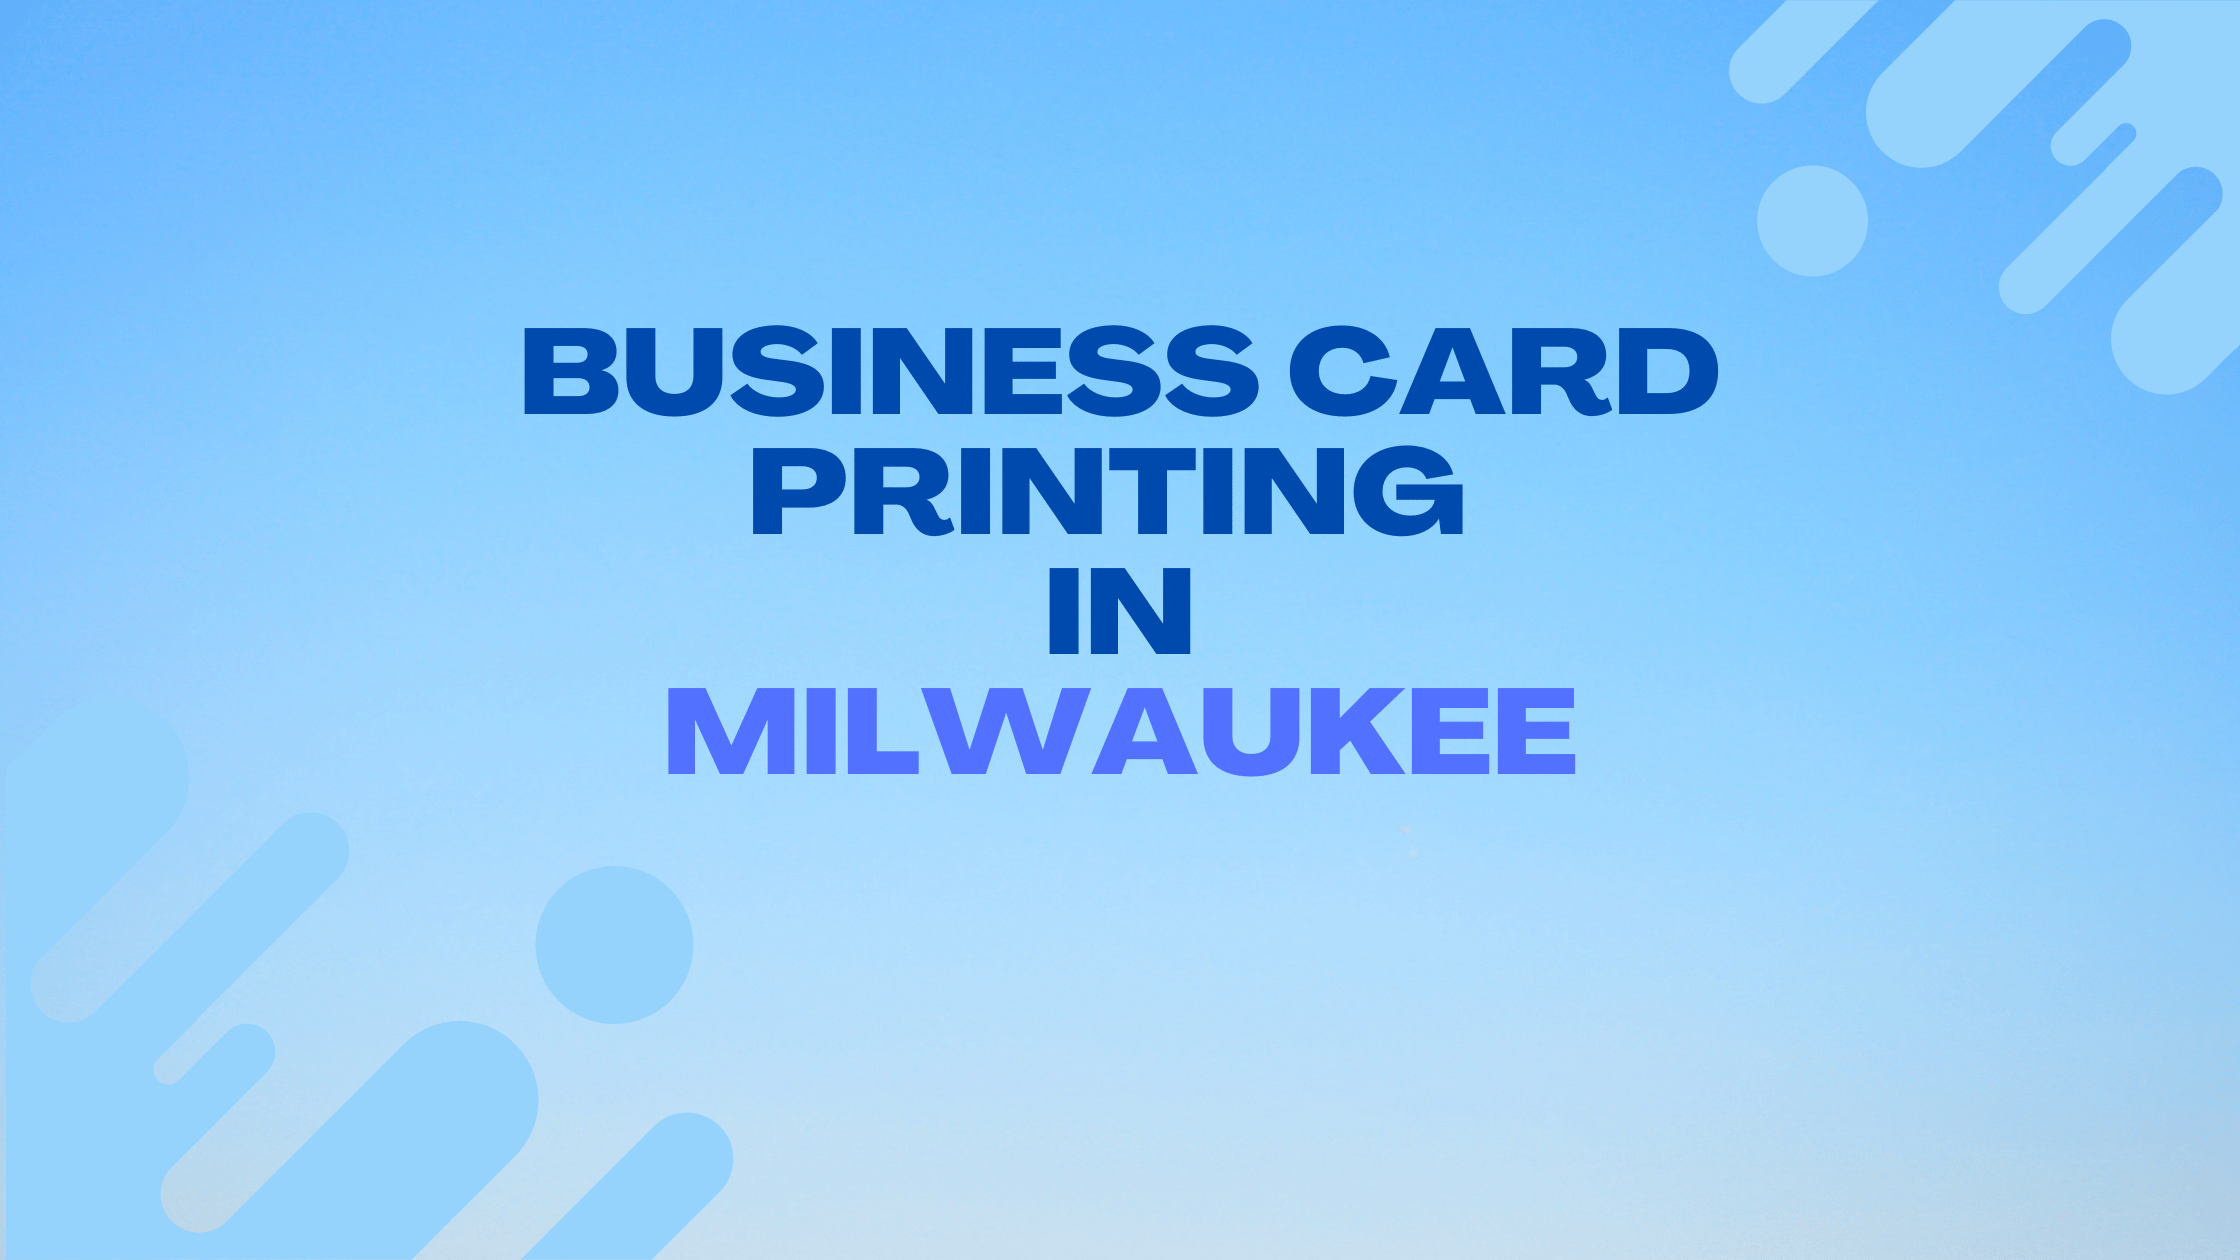 7+ Best Business Card Printing in milwaukee